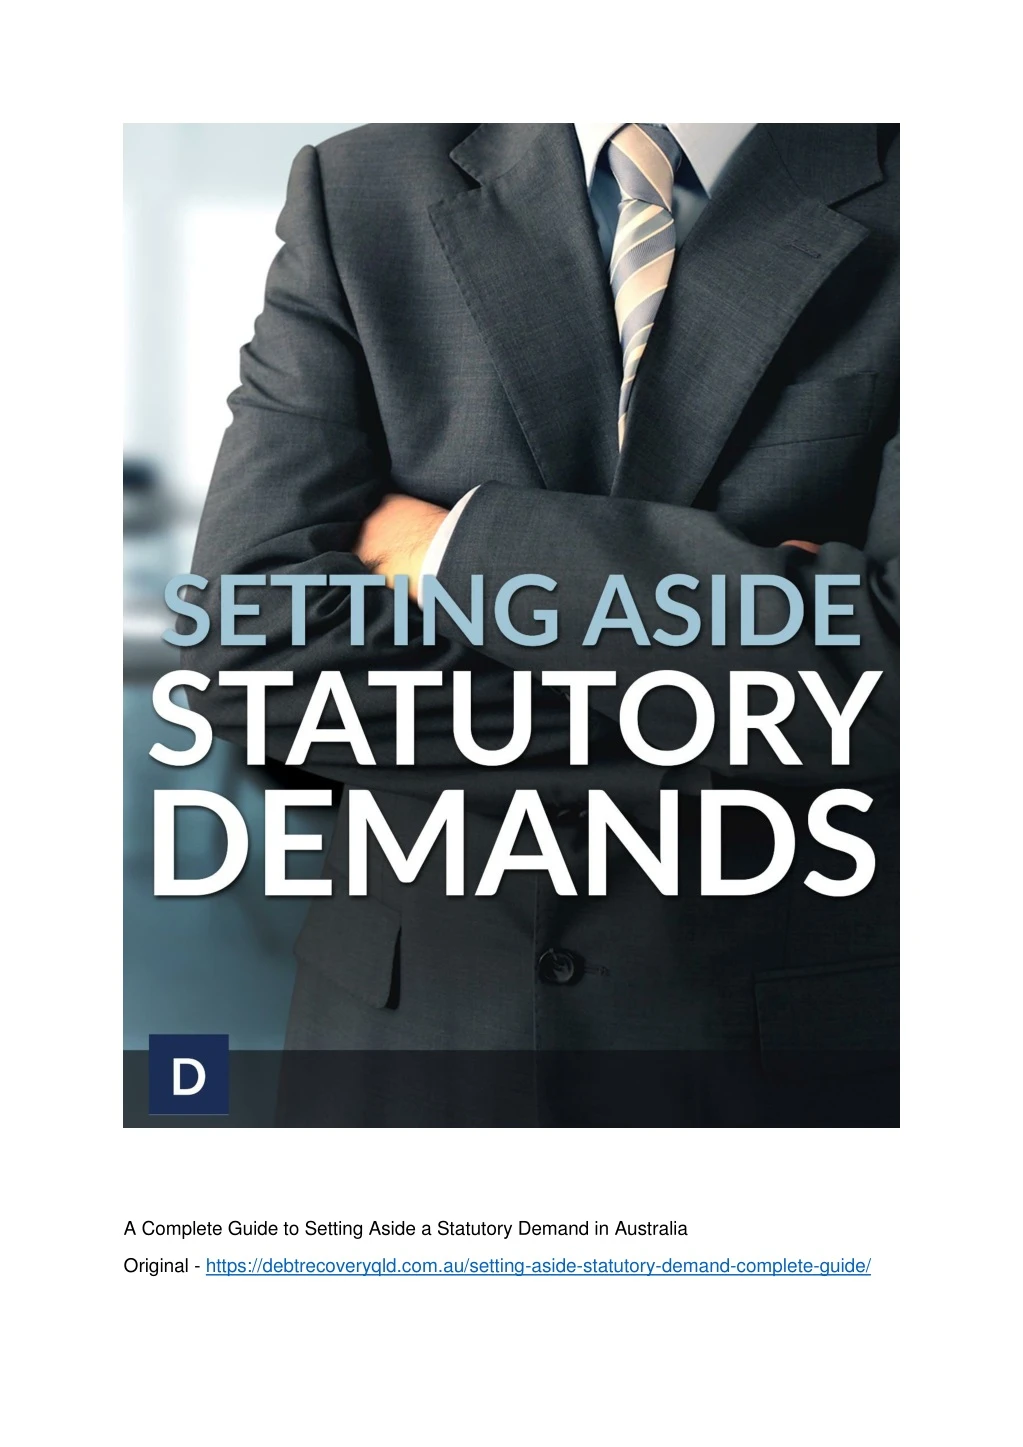 a complete guide to setting aside a statutory